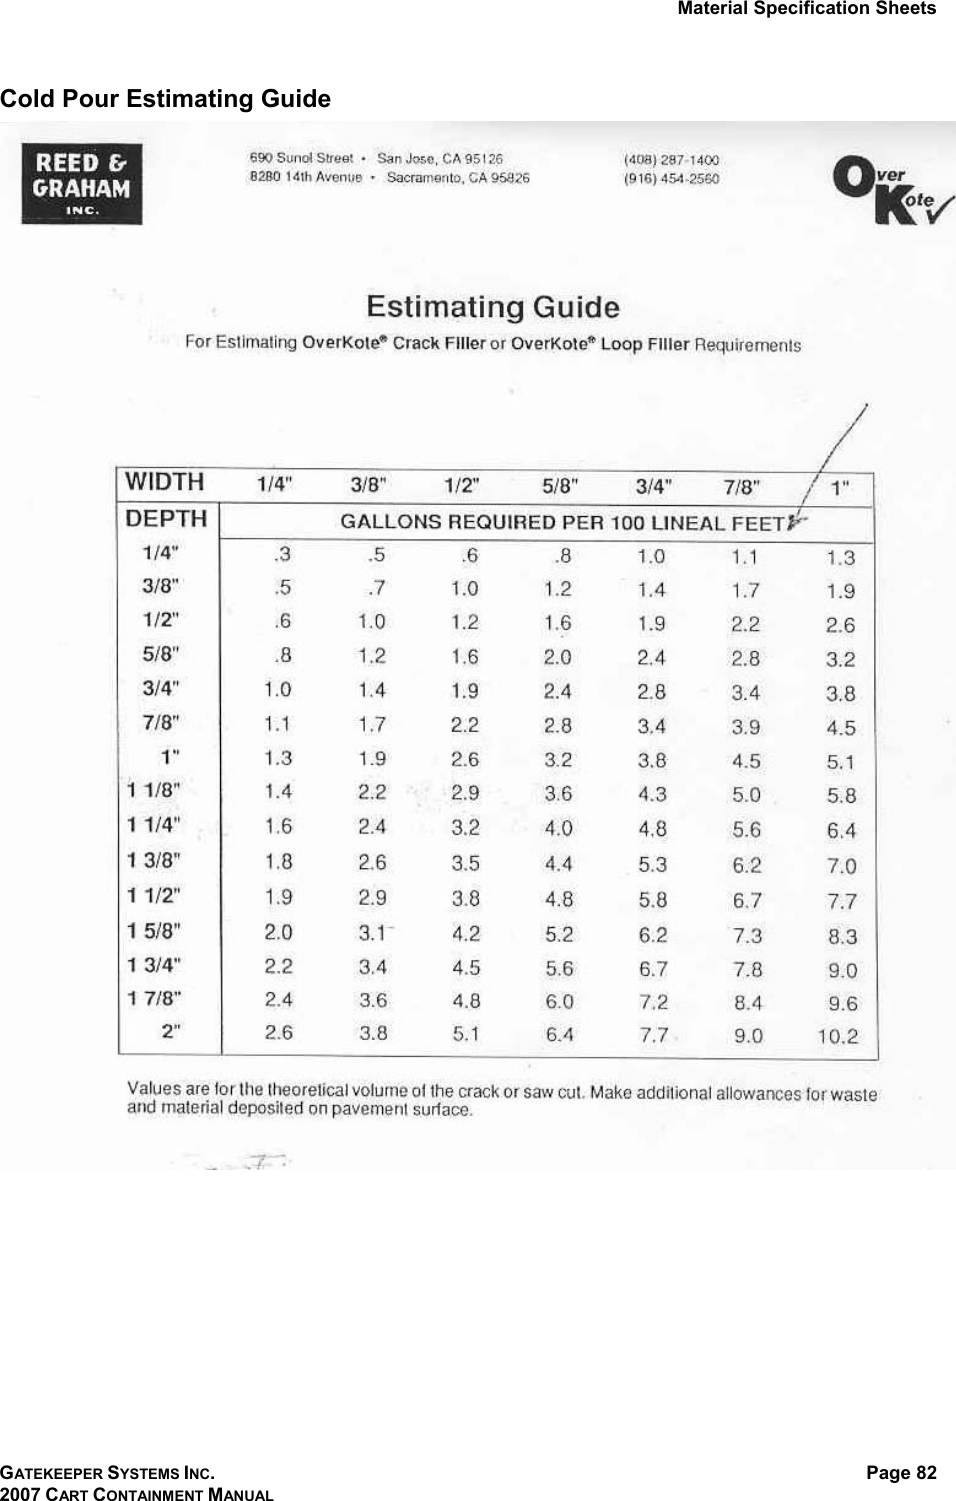 Material Specification Sheets GATEKEEPER SYSTEMS INC. 2007 CART CONTAINMENT MANUAL Page 82  Cold Pour Estimating Guide   